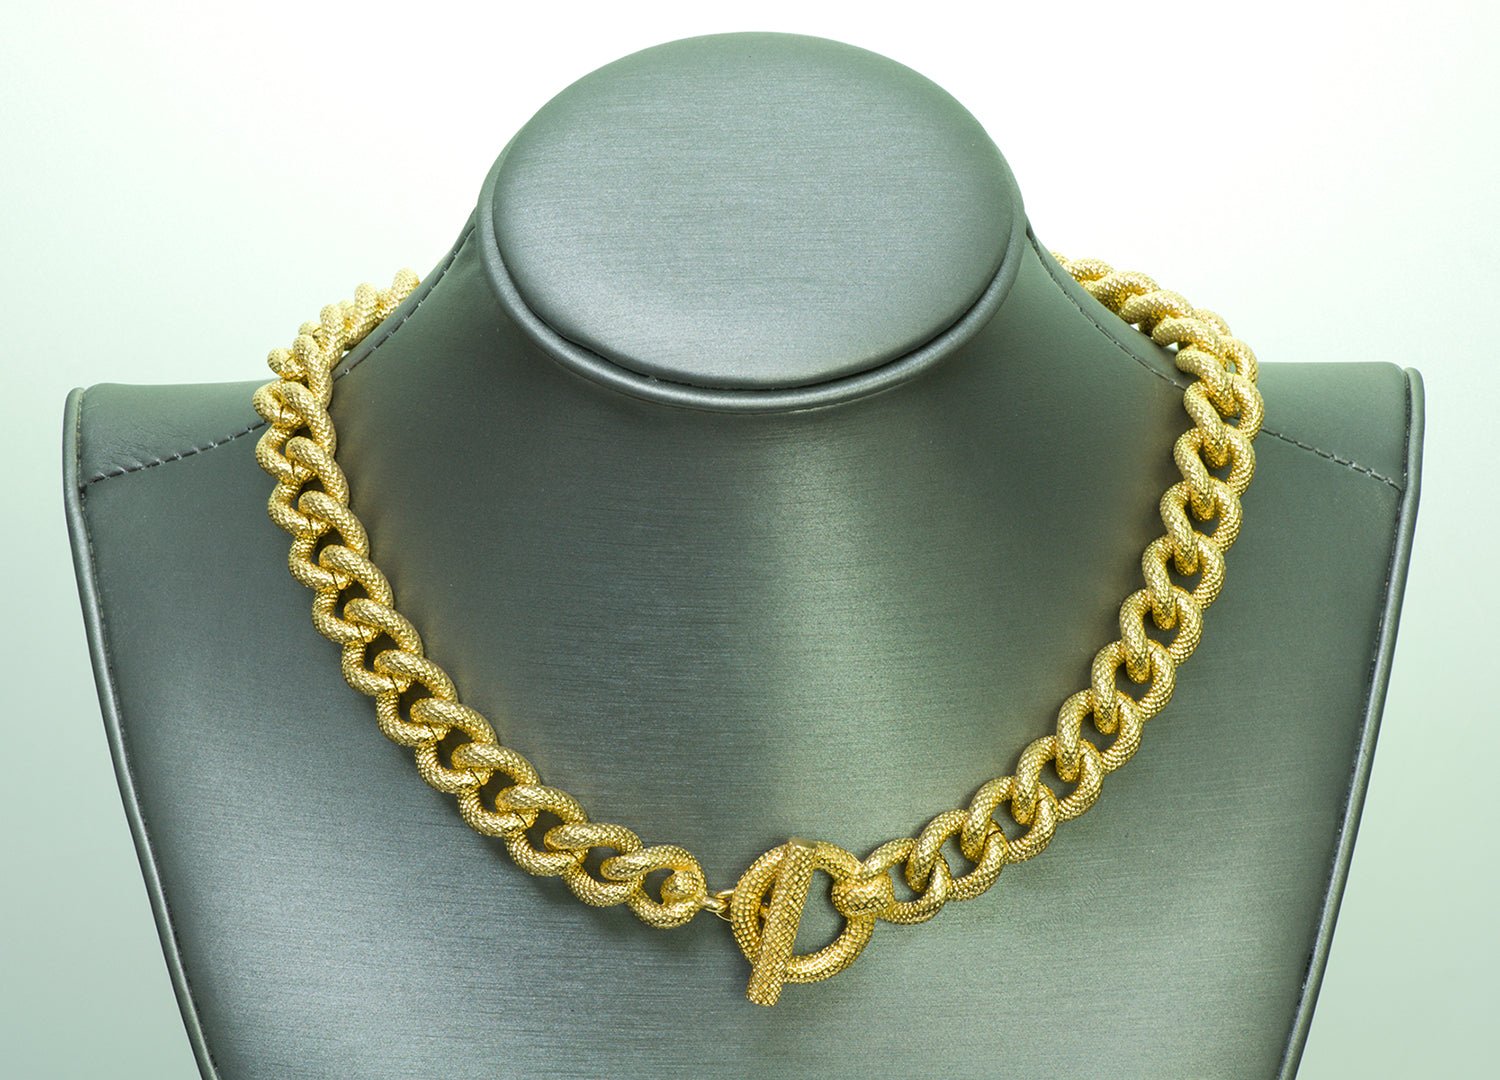 Vintage Christian Dior Gold Tone Chain Necklace